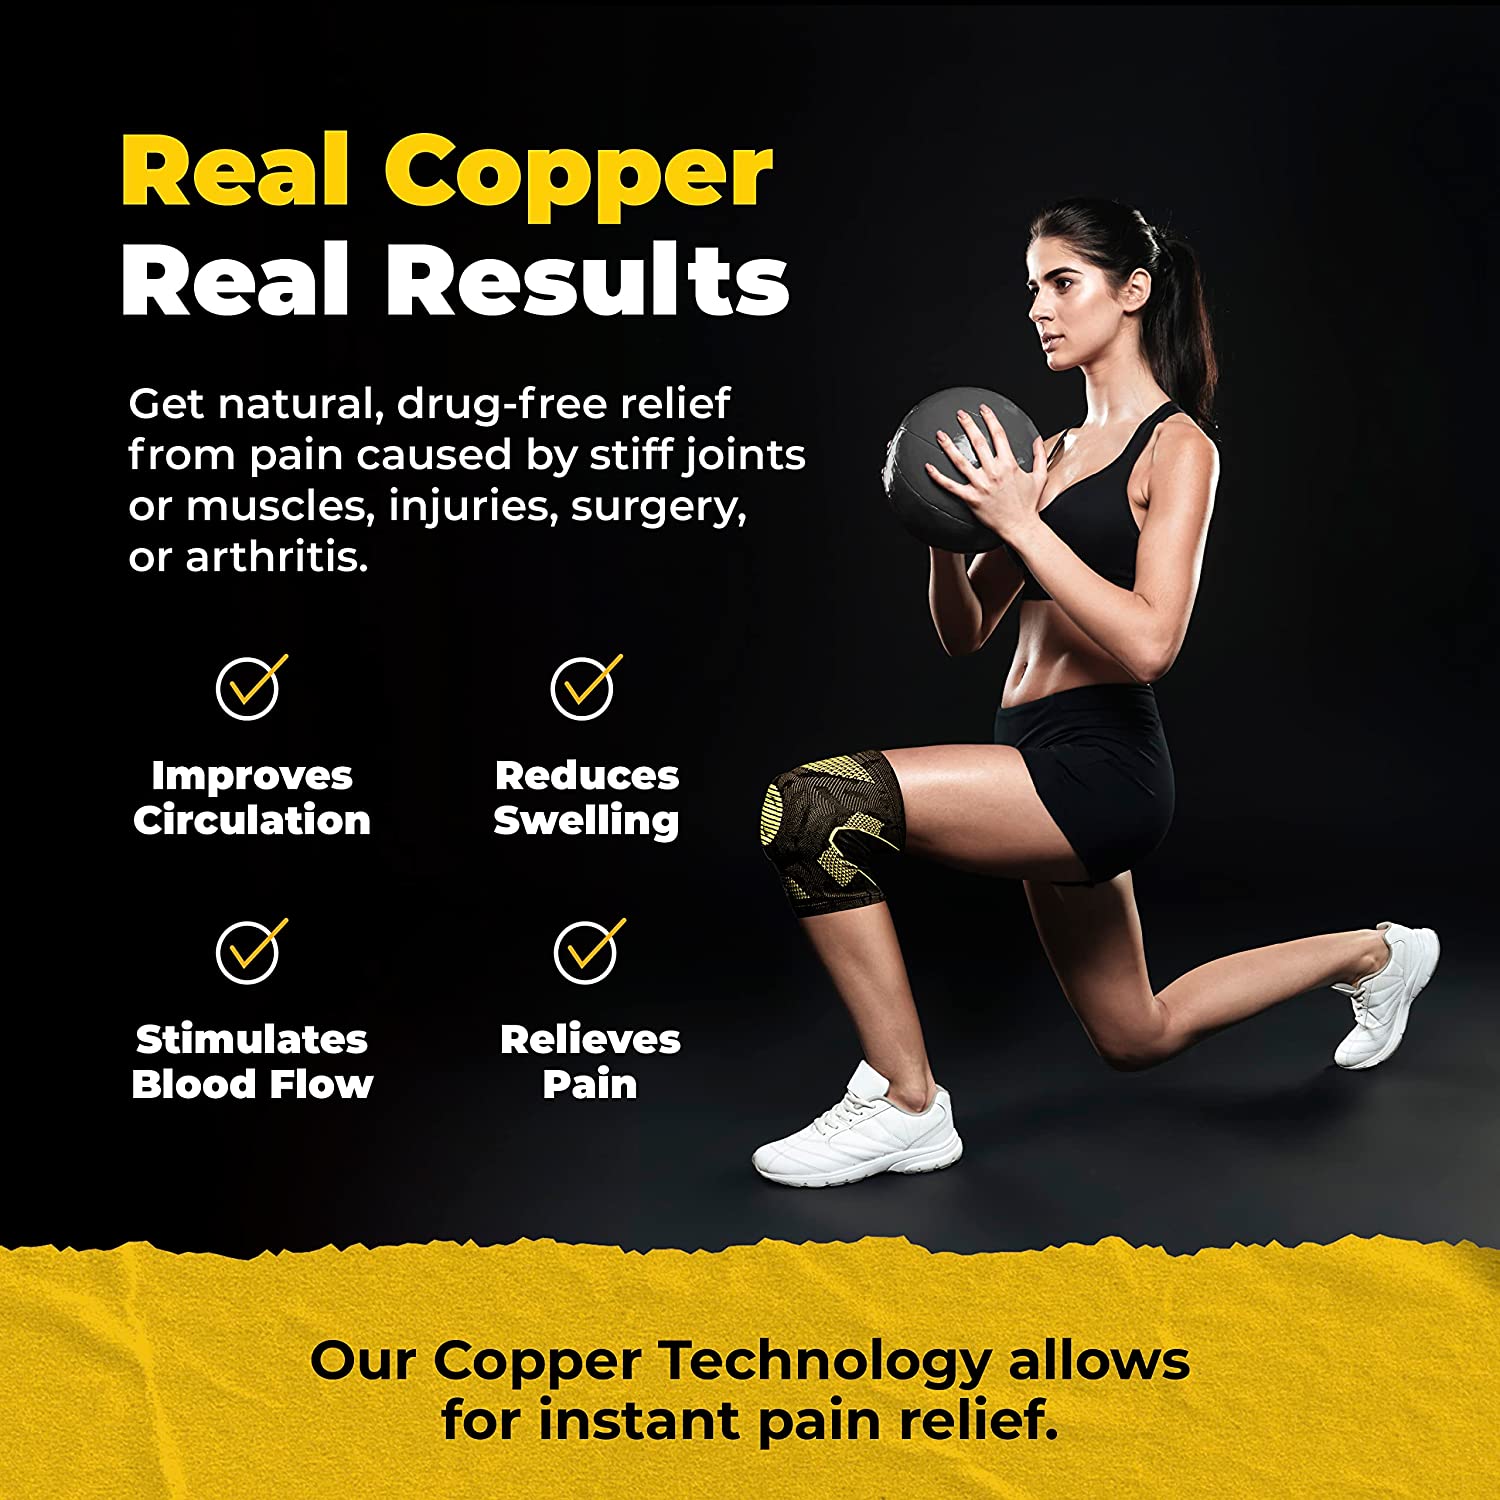 CopperJoint Offers Launch Discount on New Knee Brace Patella Stabilizer